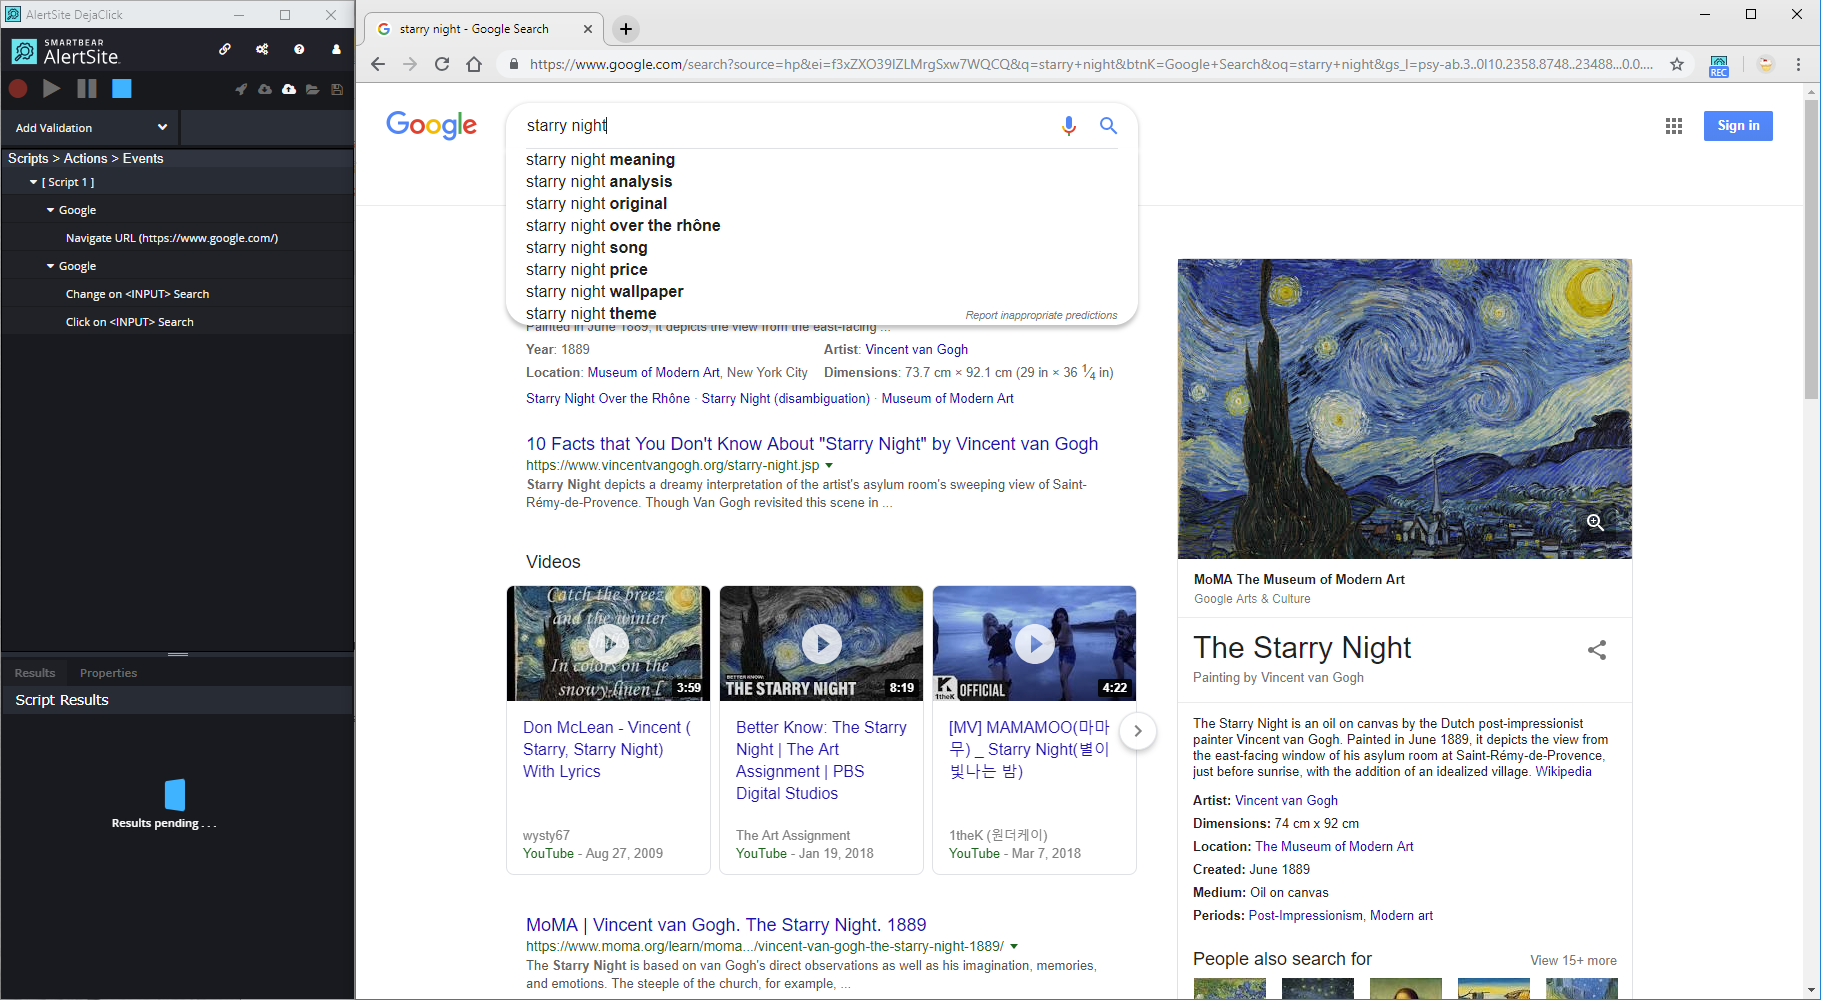 Starry Night search results in Google